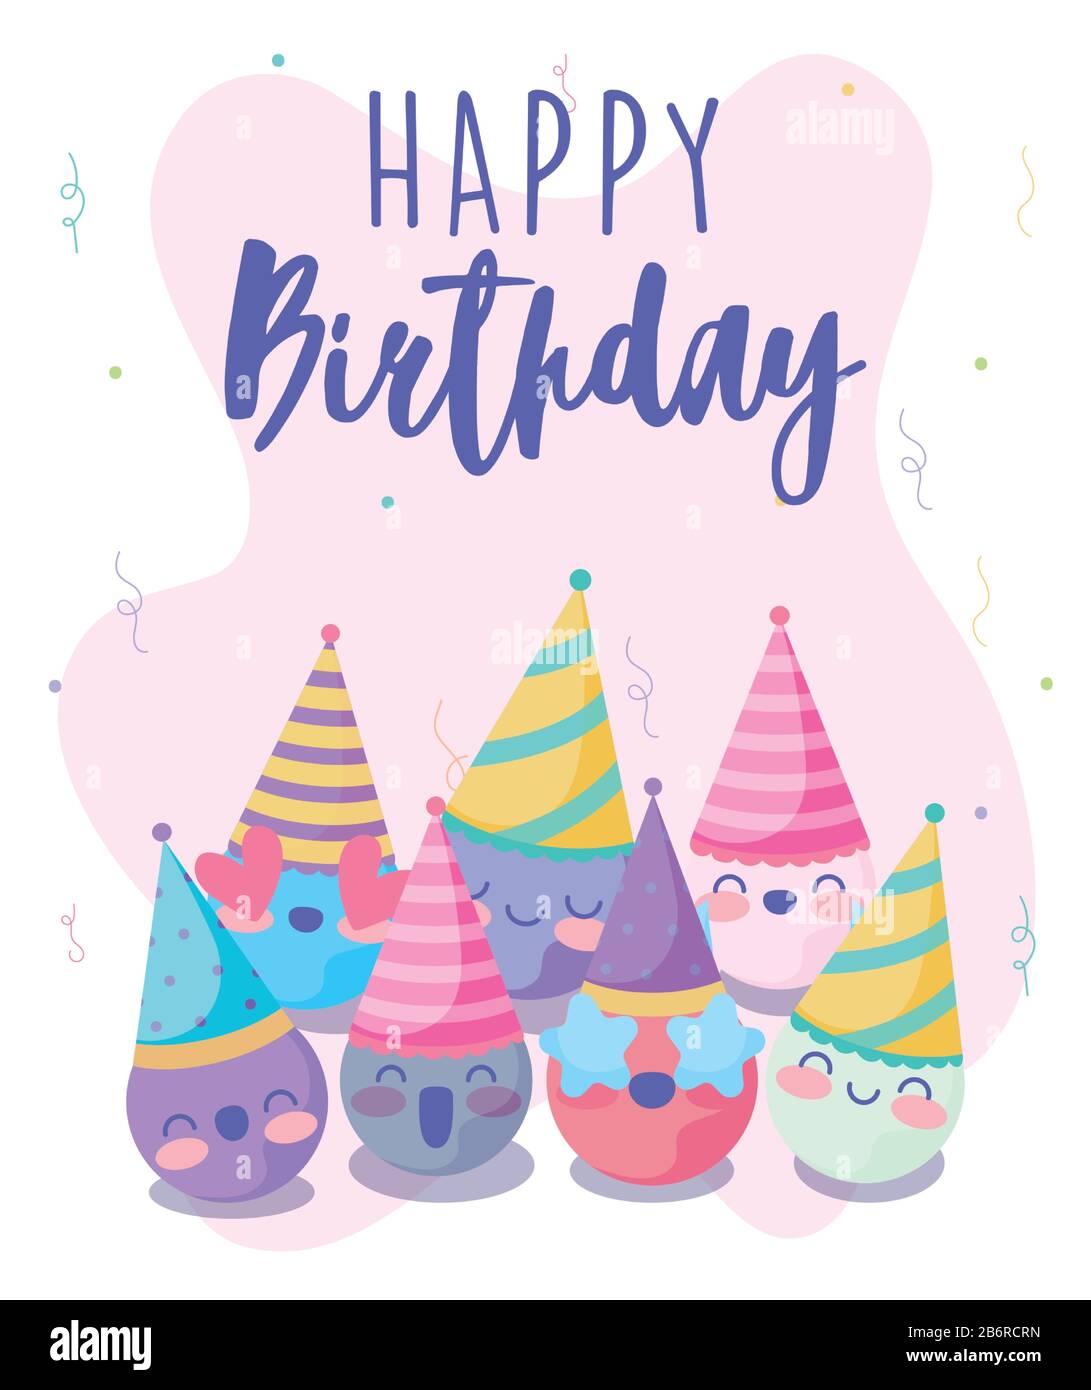 Happy birthday design with cute happy emojis with party hats over ...